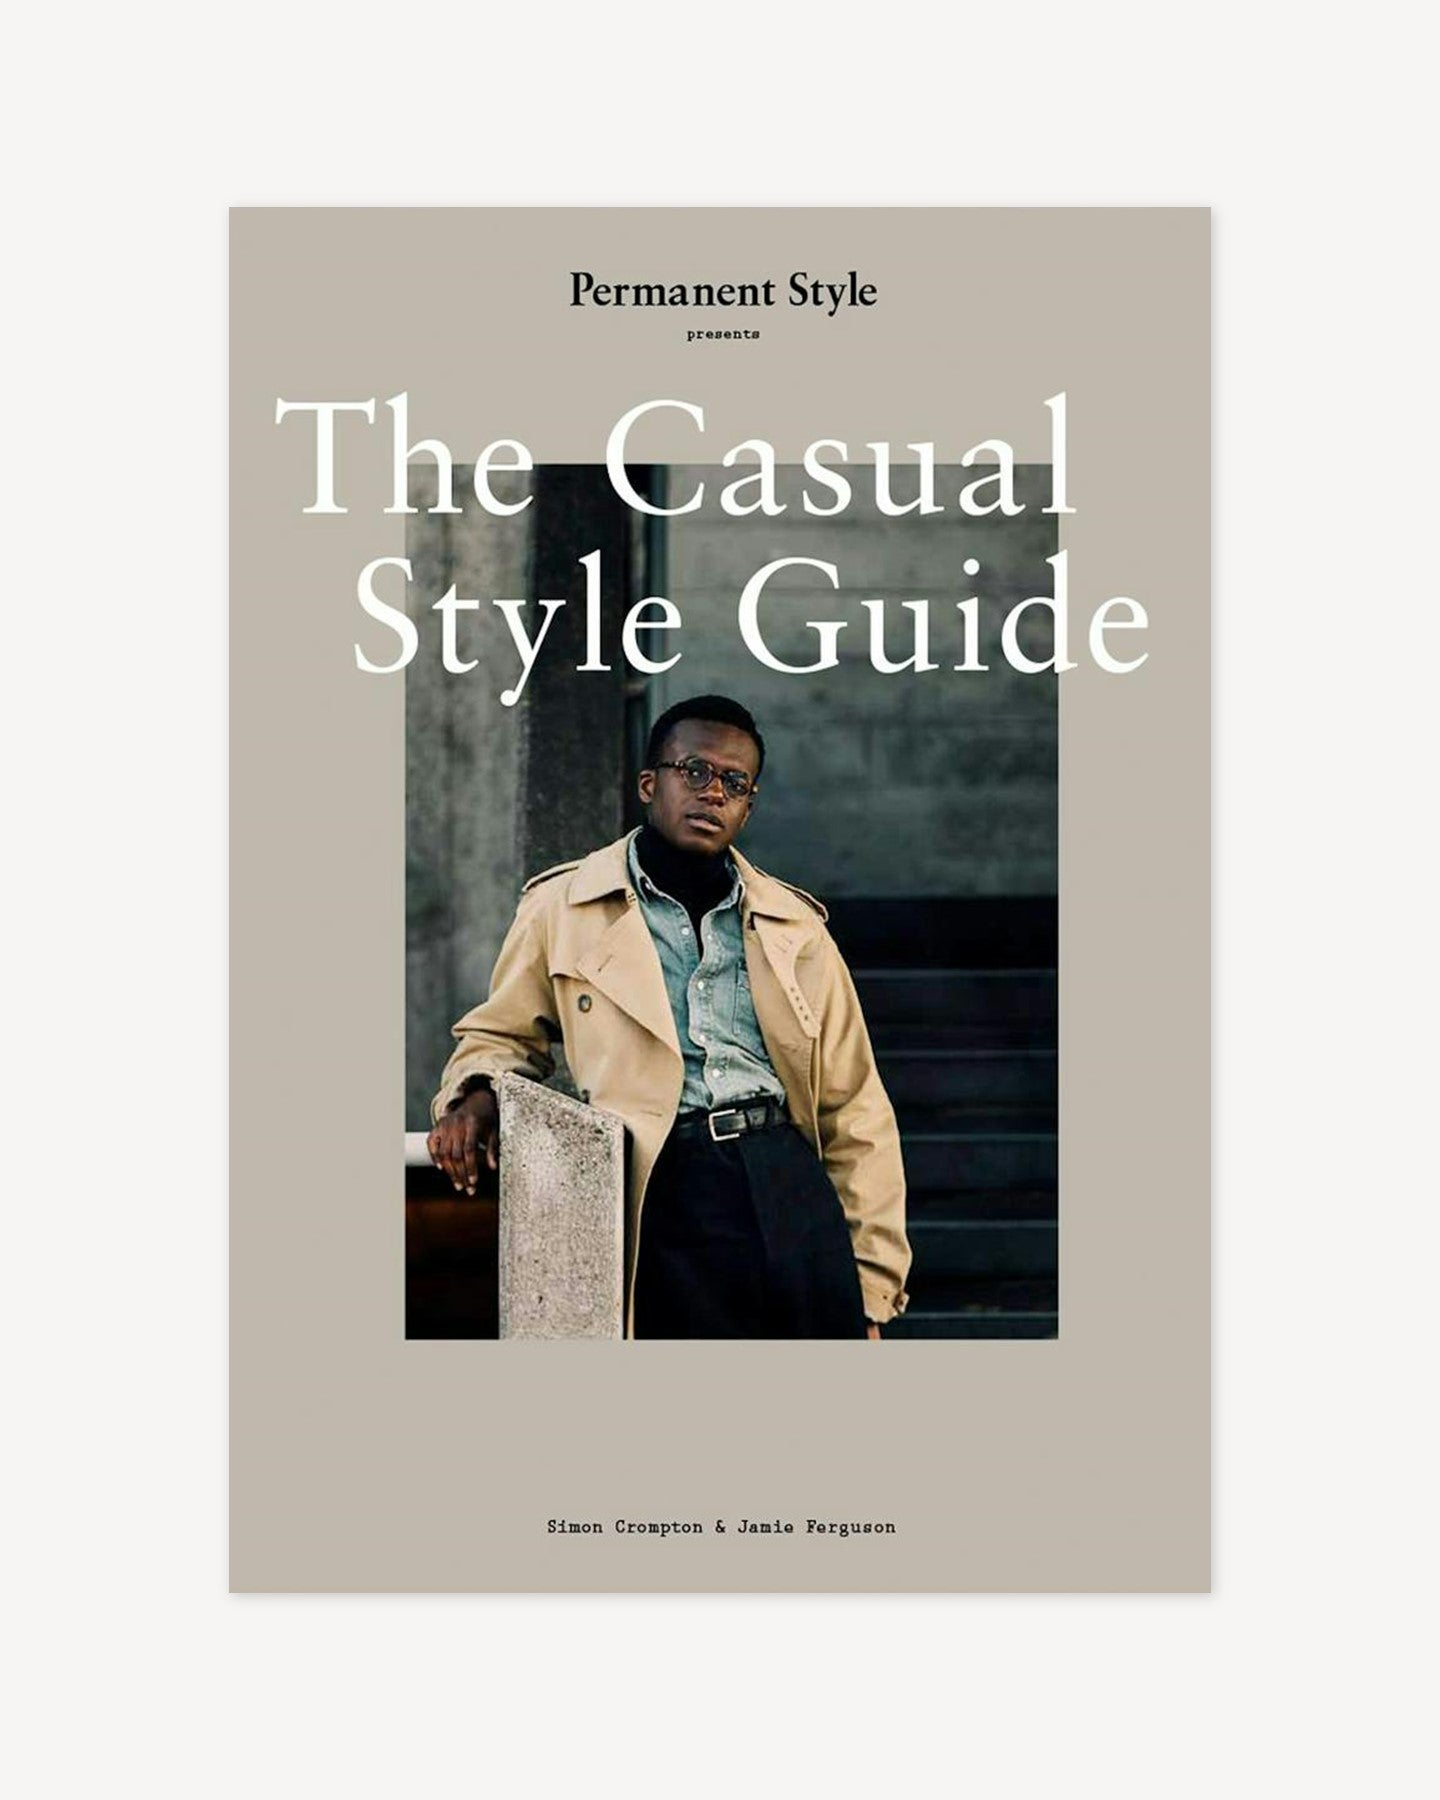 Book The Casual Style Guide by Permanent Style